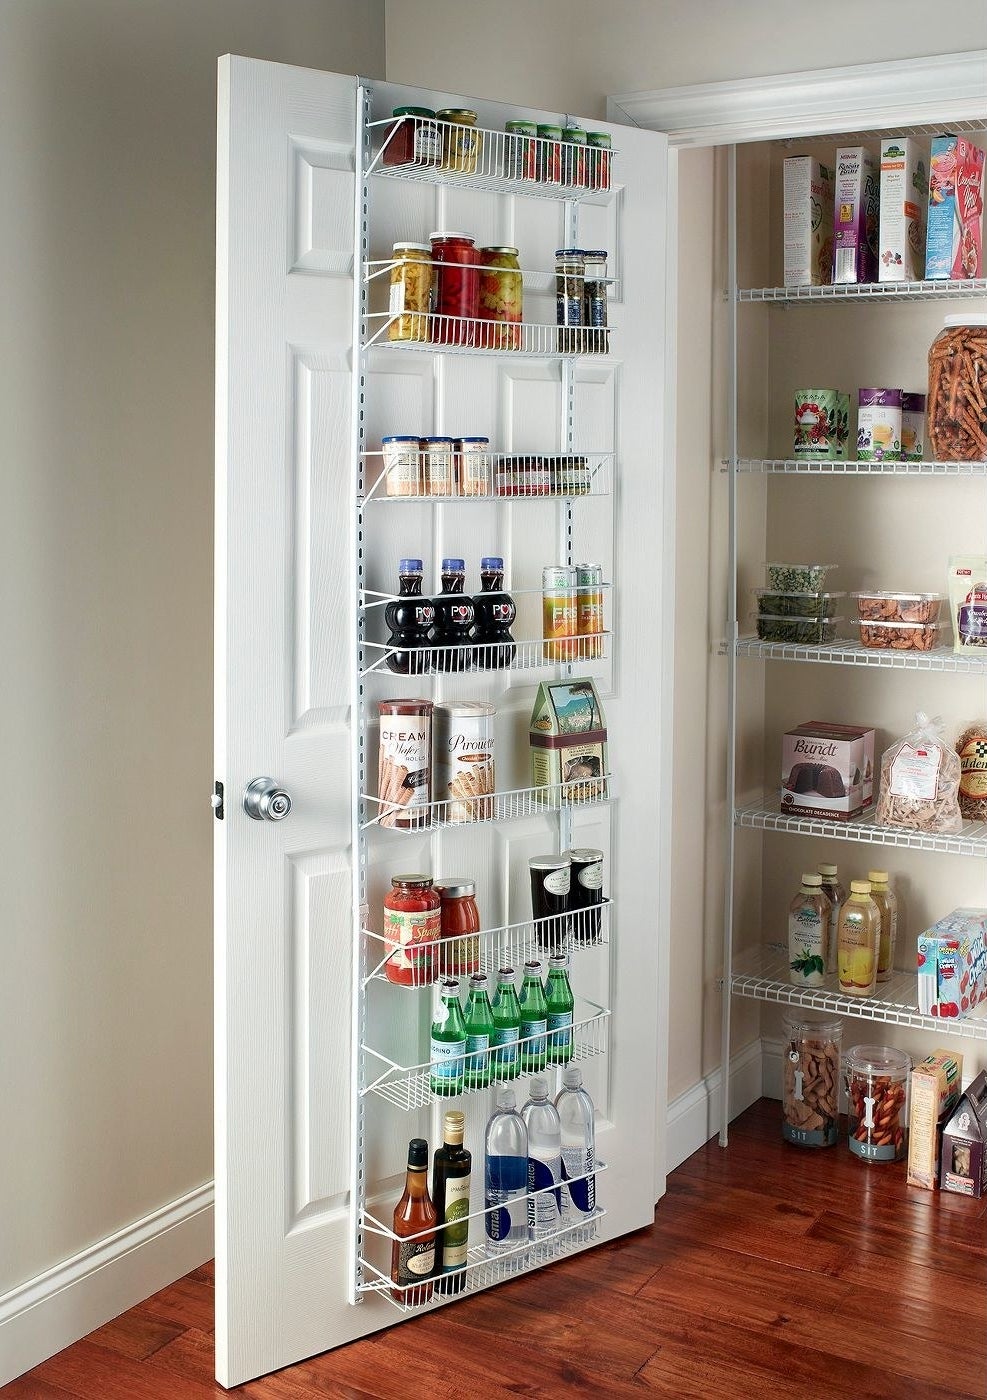 White wire rack behind door with canned goods, bottles of water, and more pantry items